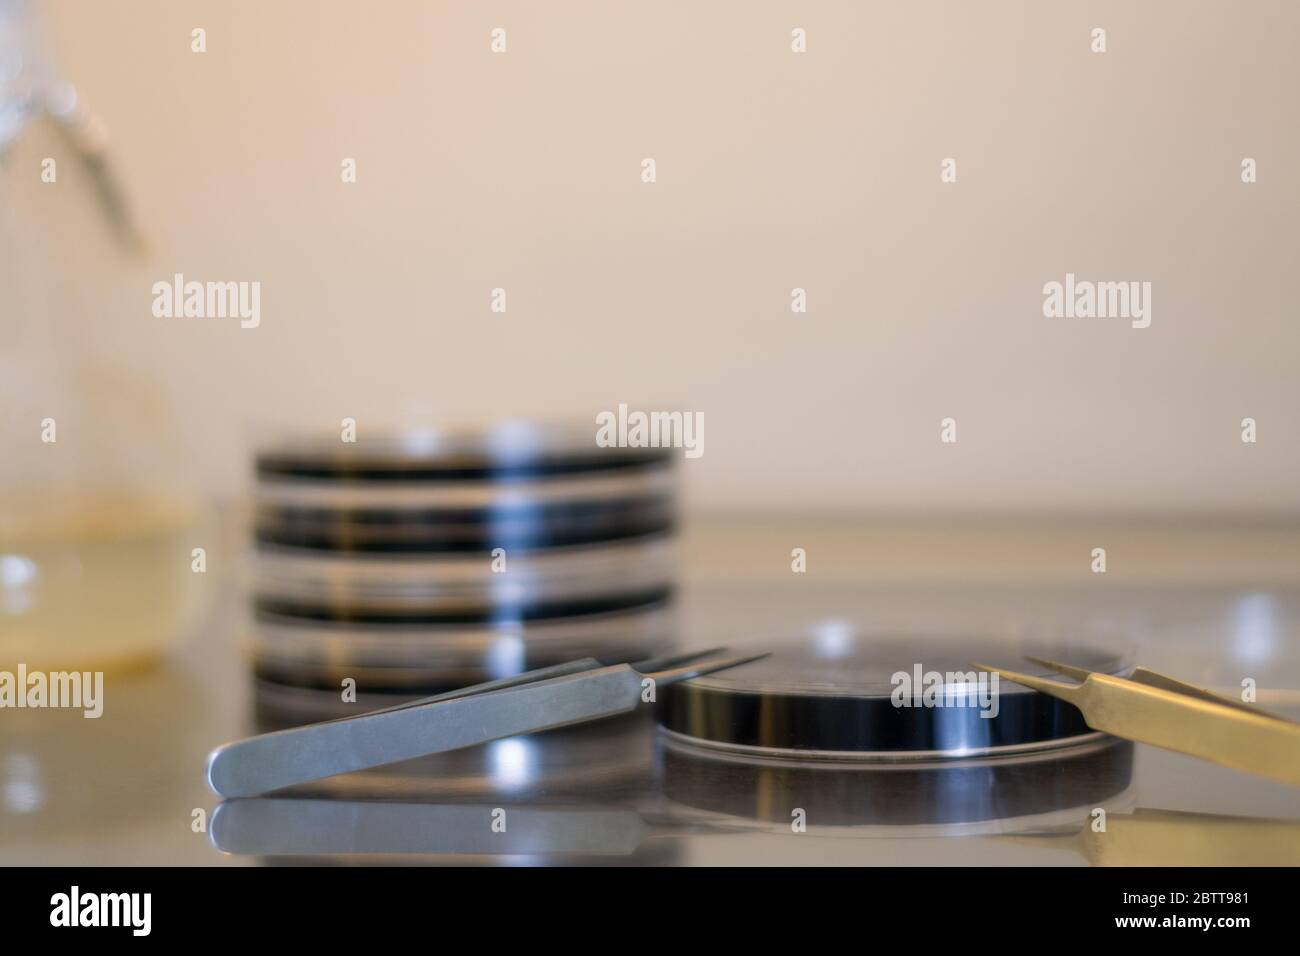 Material for a research in vitro experiment: petri dishes containing culture medium, forceps and micropipette Stock Photo